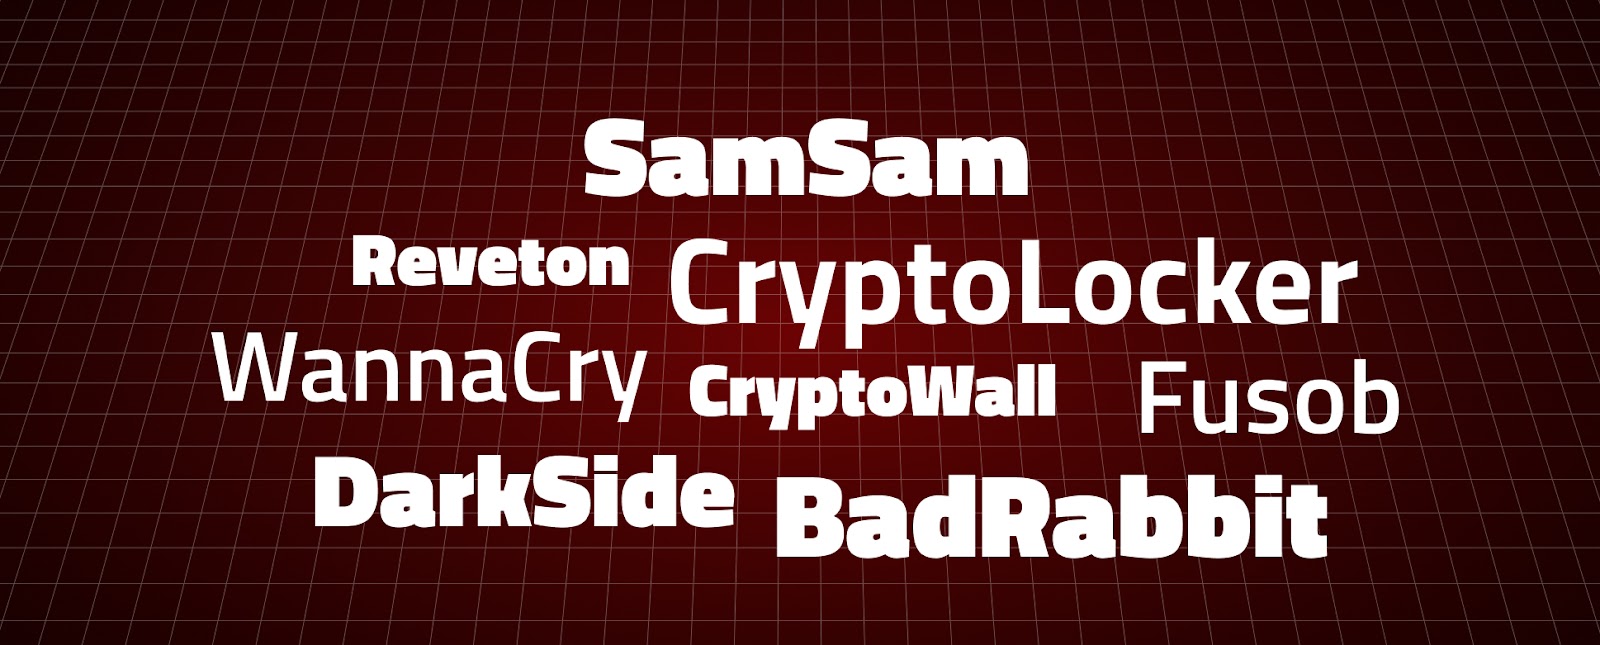 names of different types of ransomware